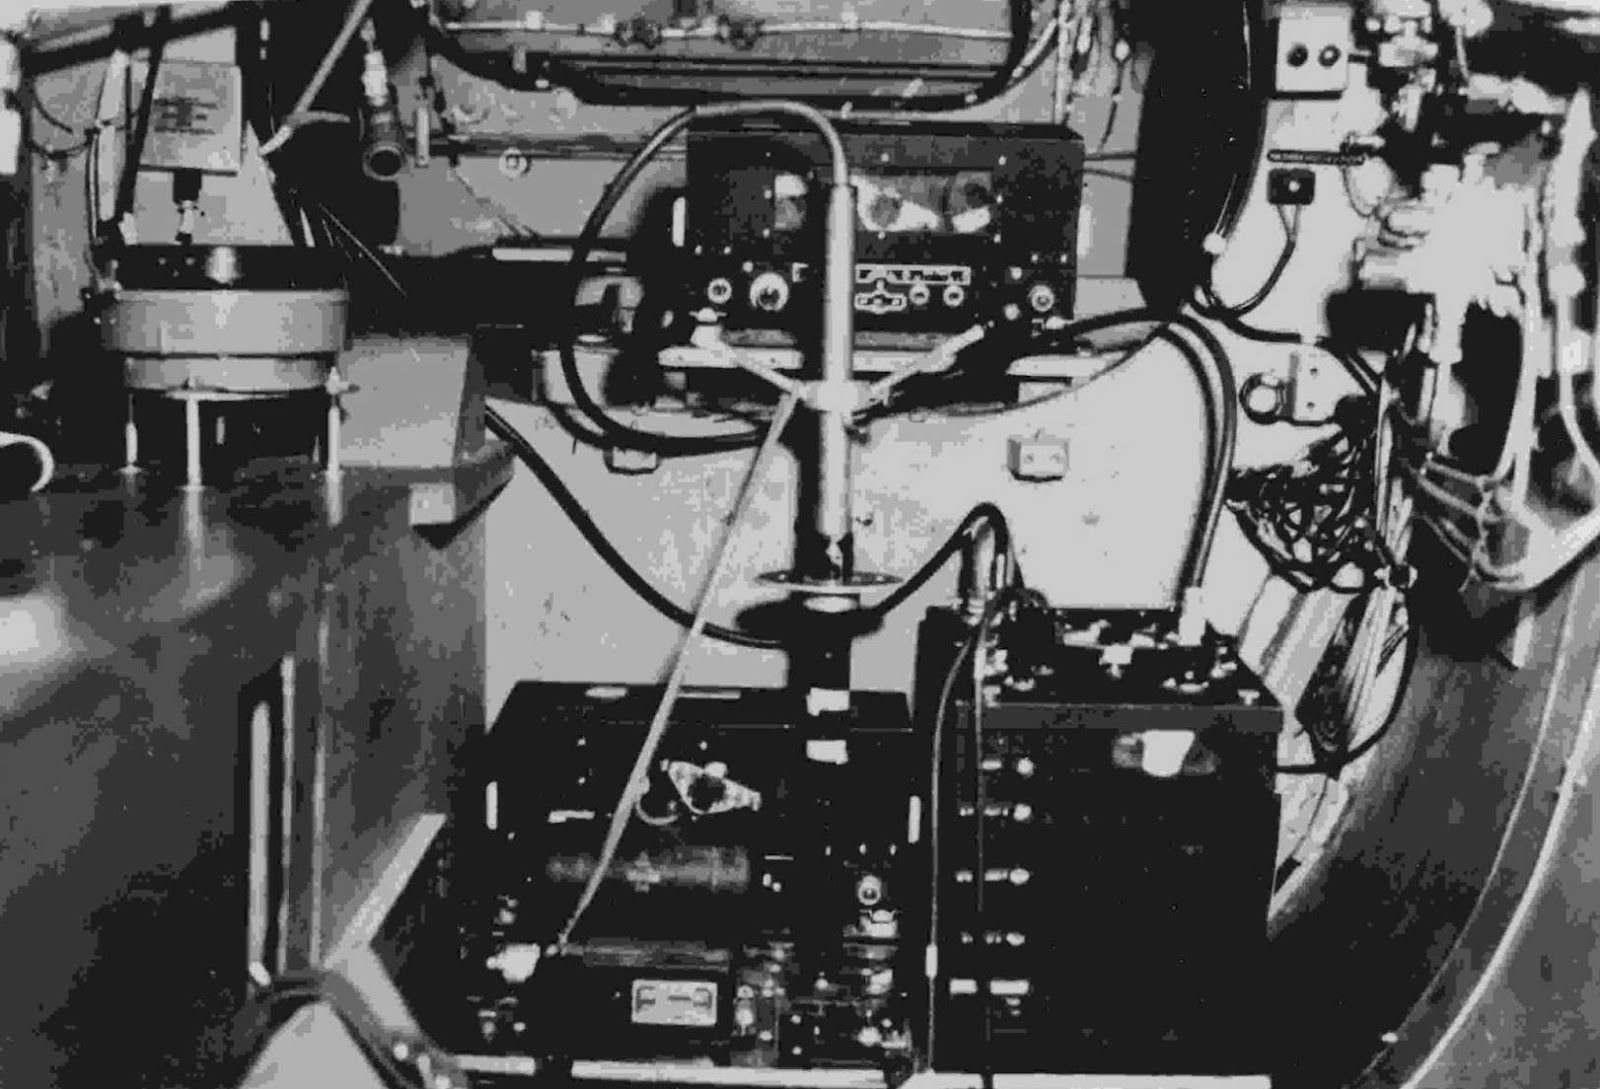 The OSS developed the Joan-Eleanor system for use in WWII intelligence operatives